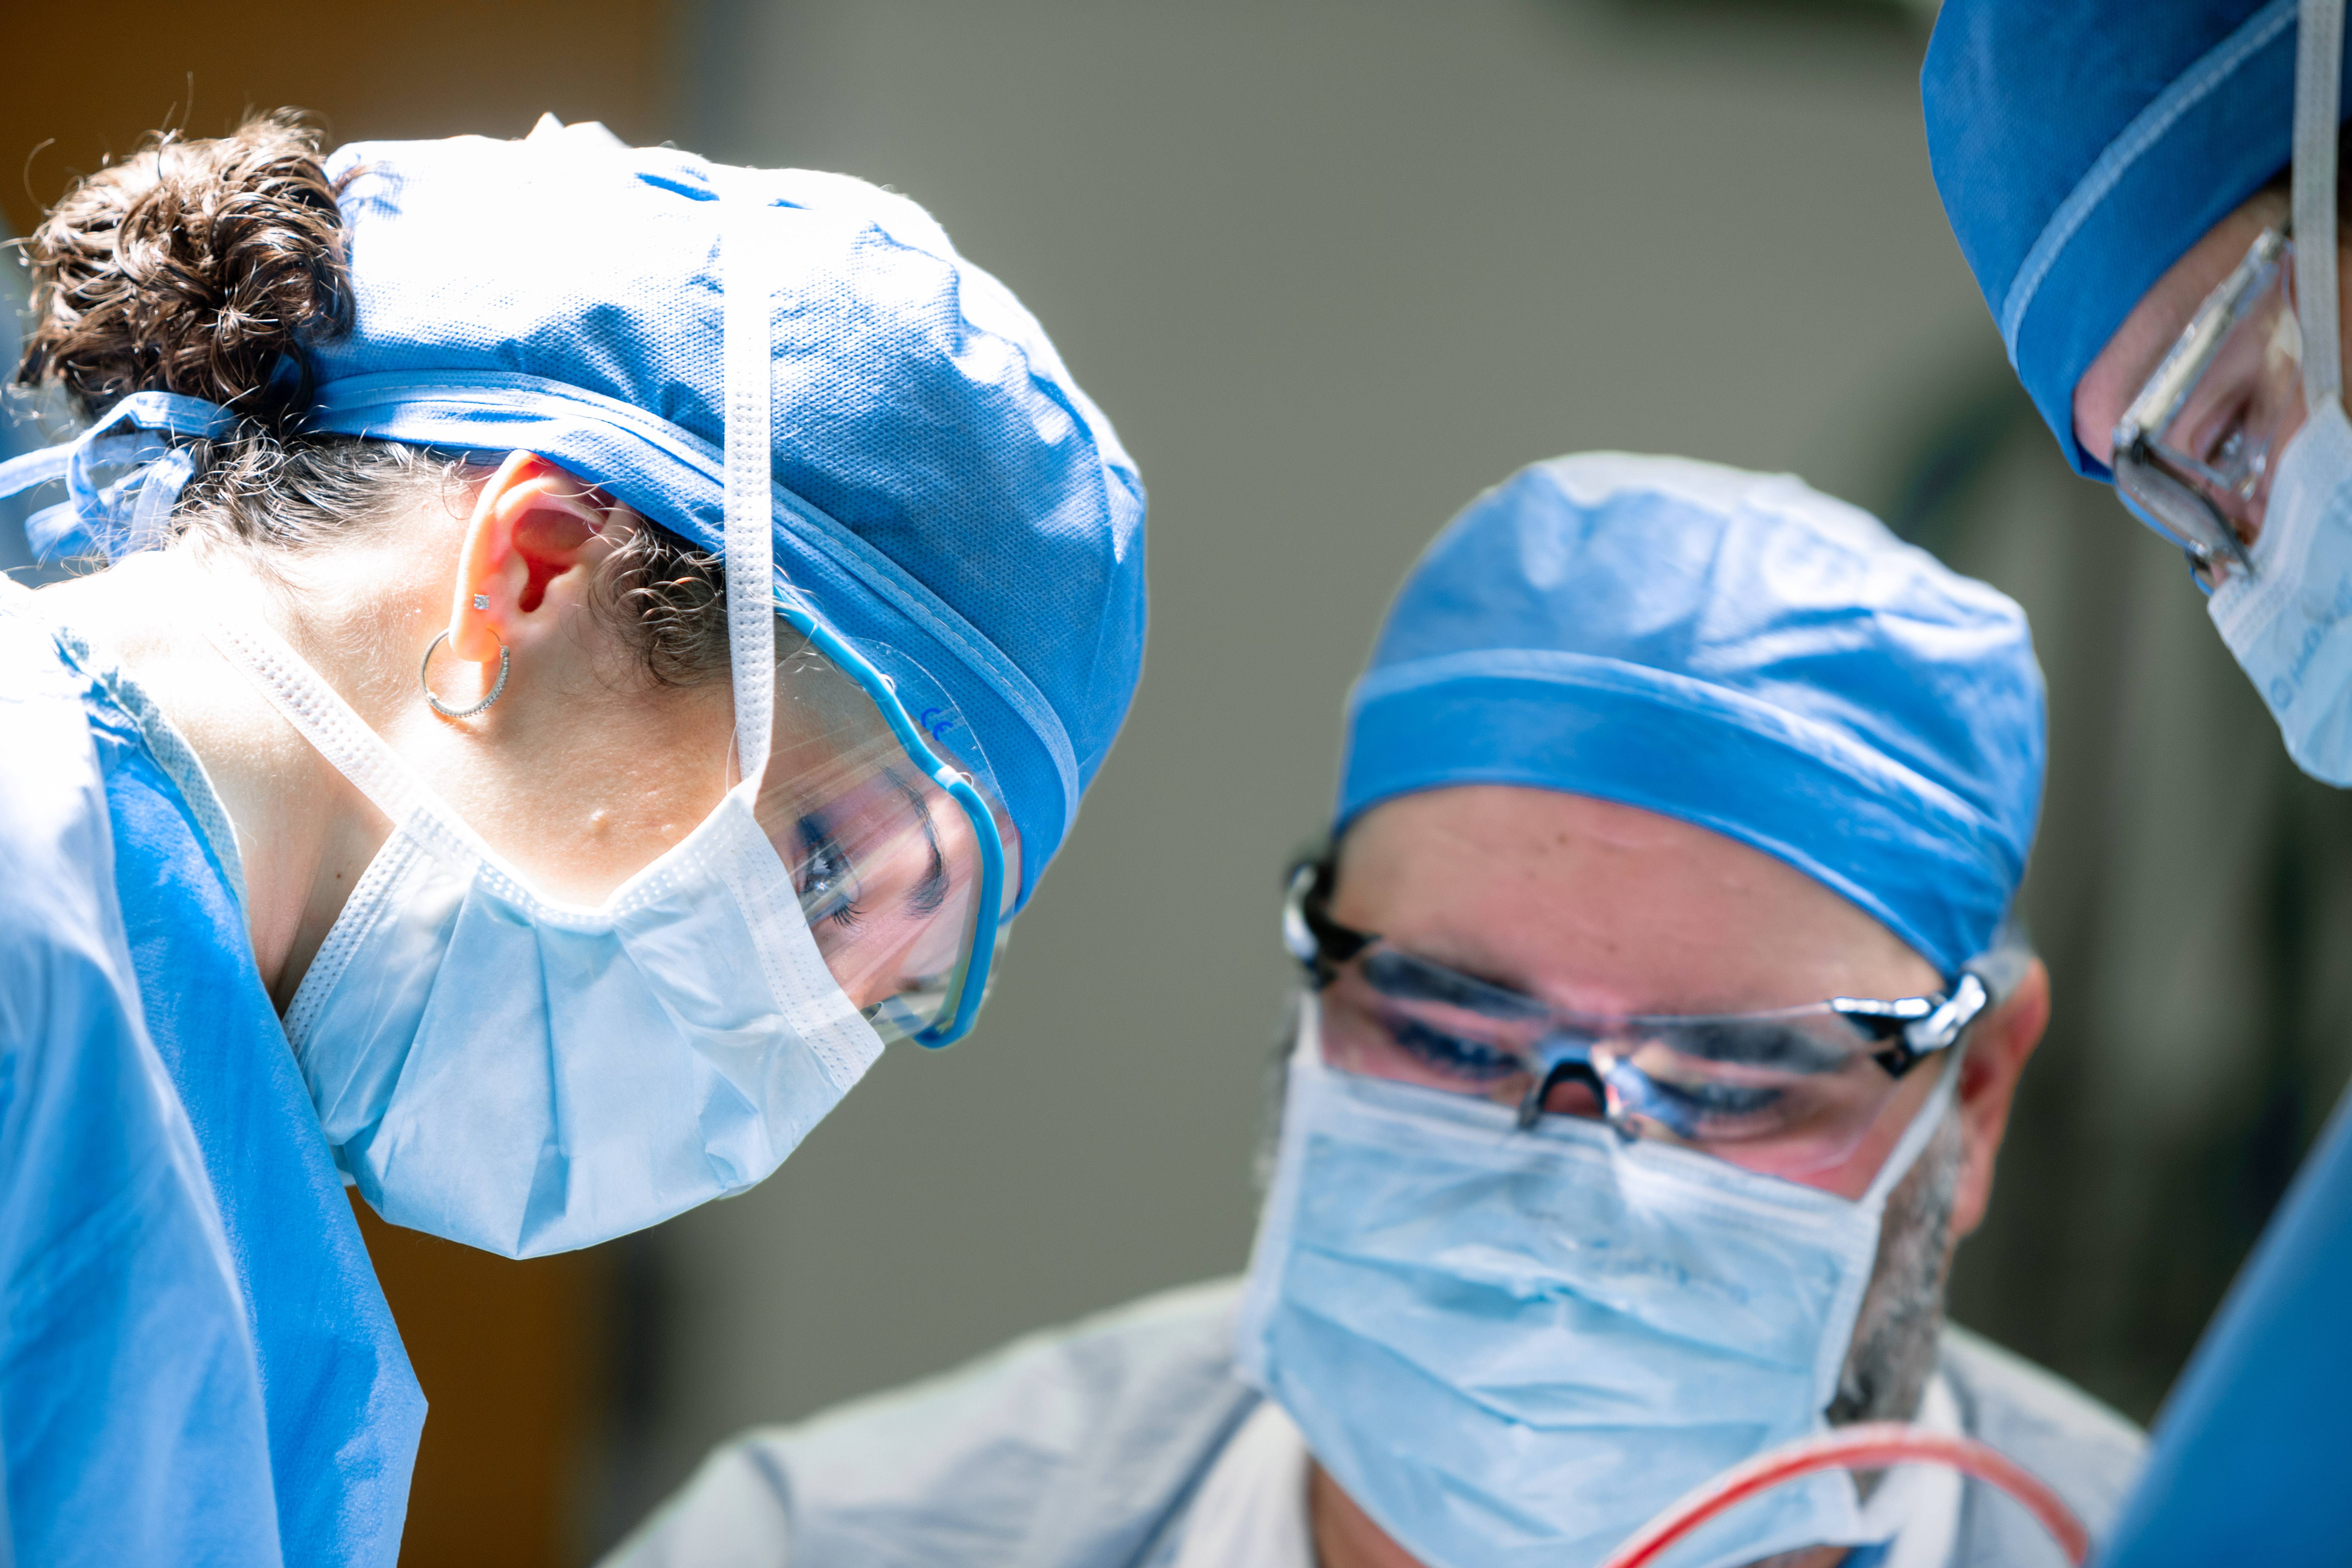 three surgeons operating on a patient while bending over